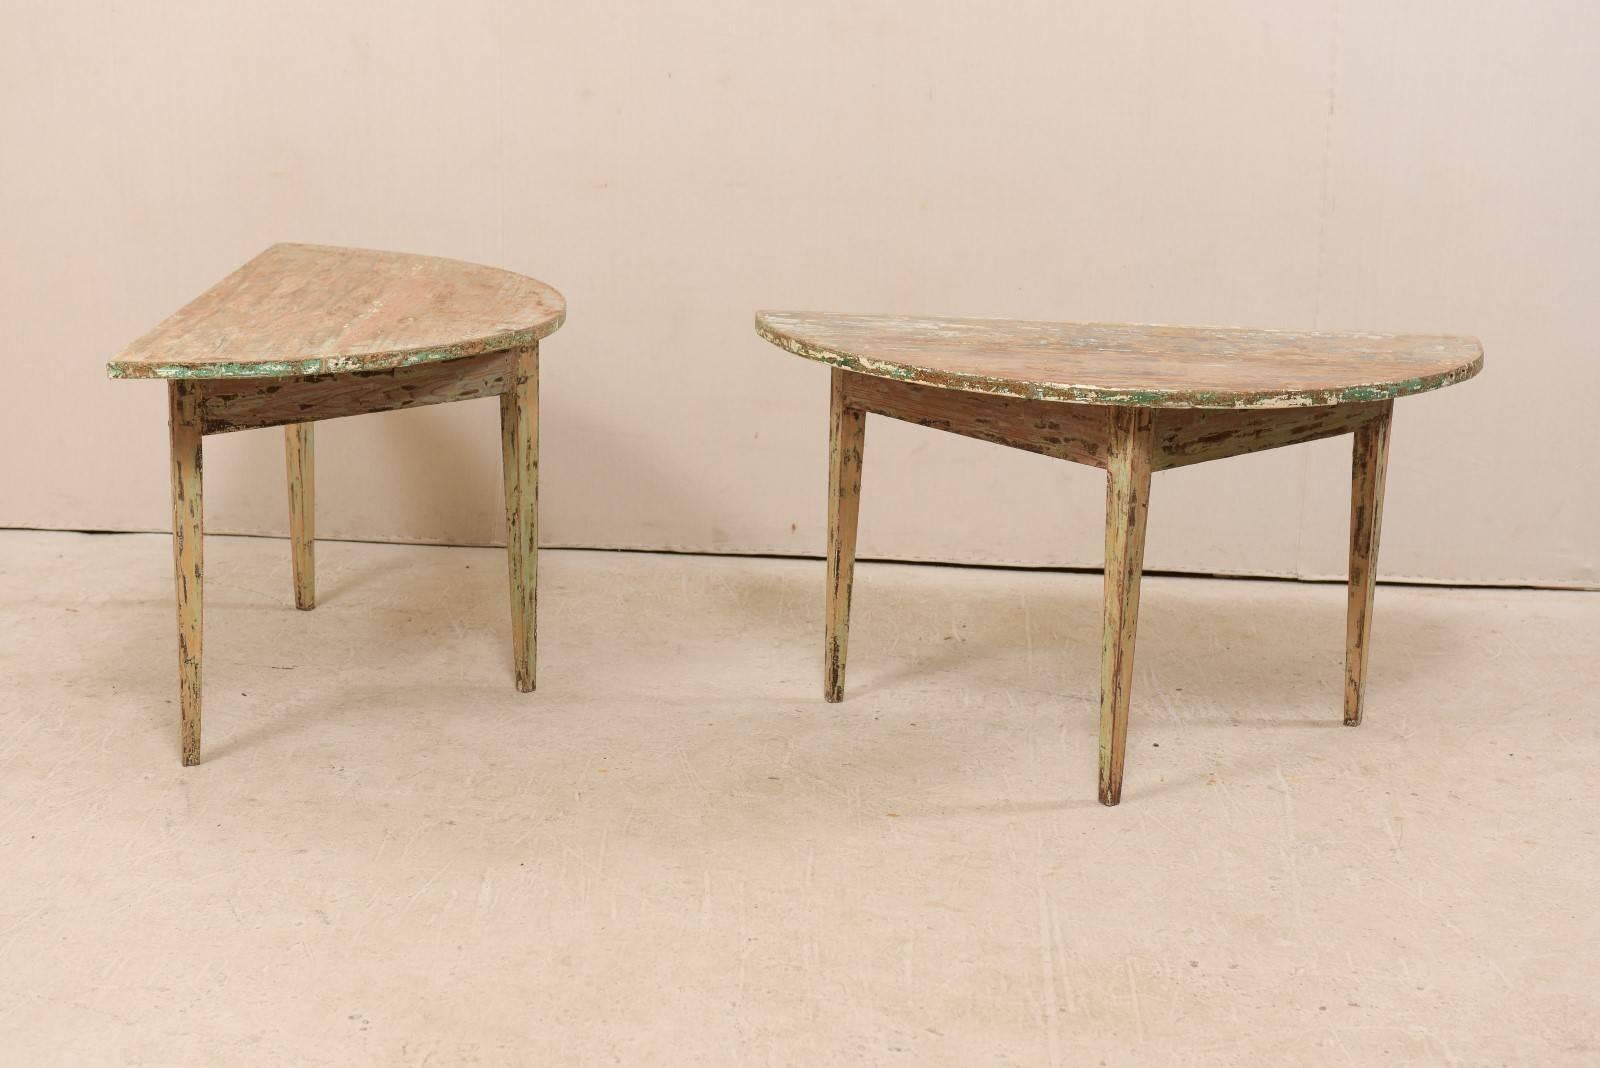 A pair of 19th century Swedish wooden demilune tables. This pair of Swedish demilune tables from the 1880s features a semi-circular top over a triangular shaped apron. These demilune tables are each raised upon three squared and gently tapered legs.